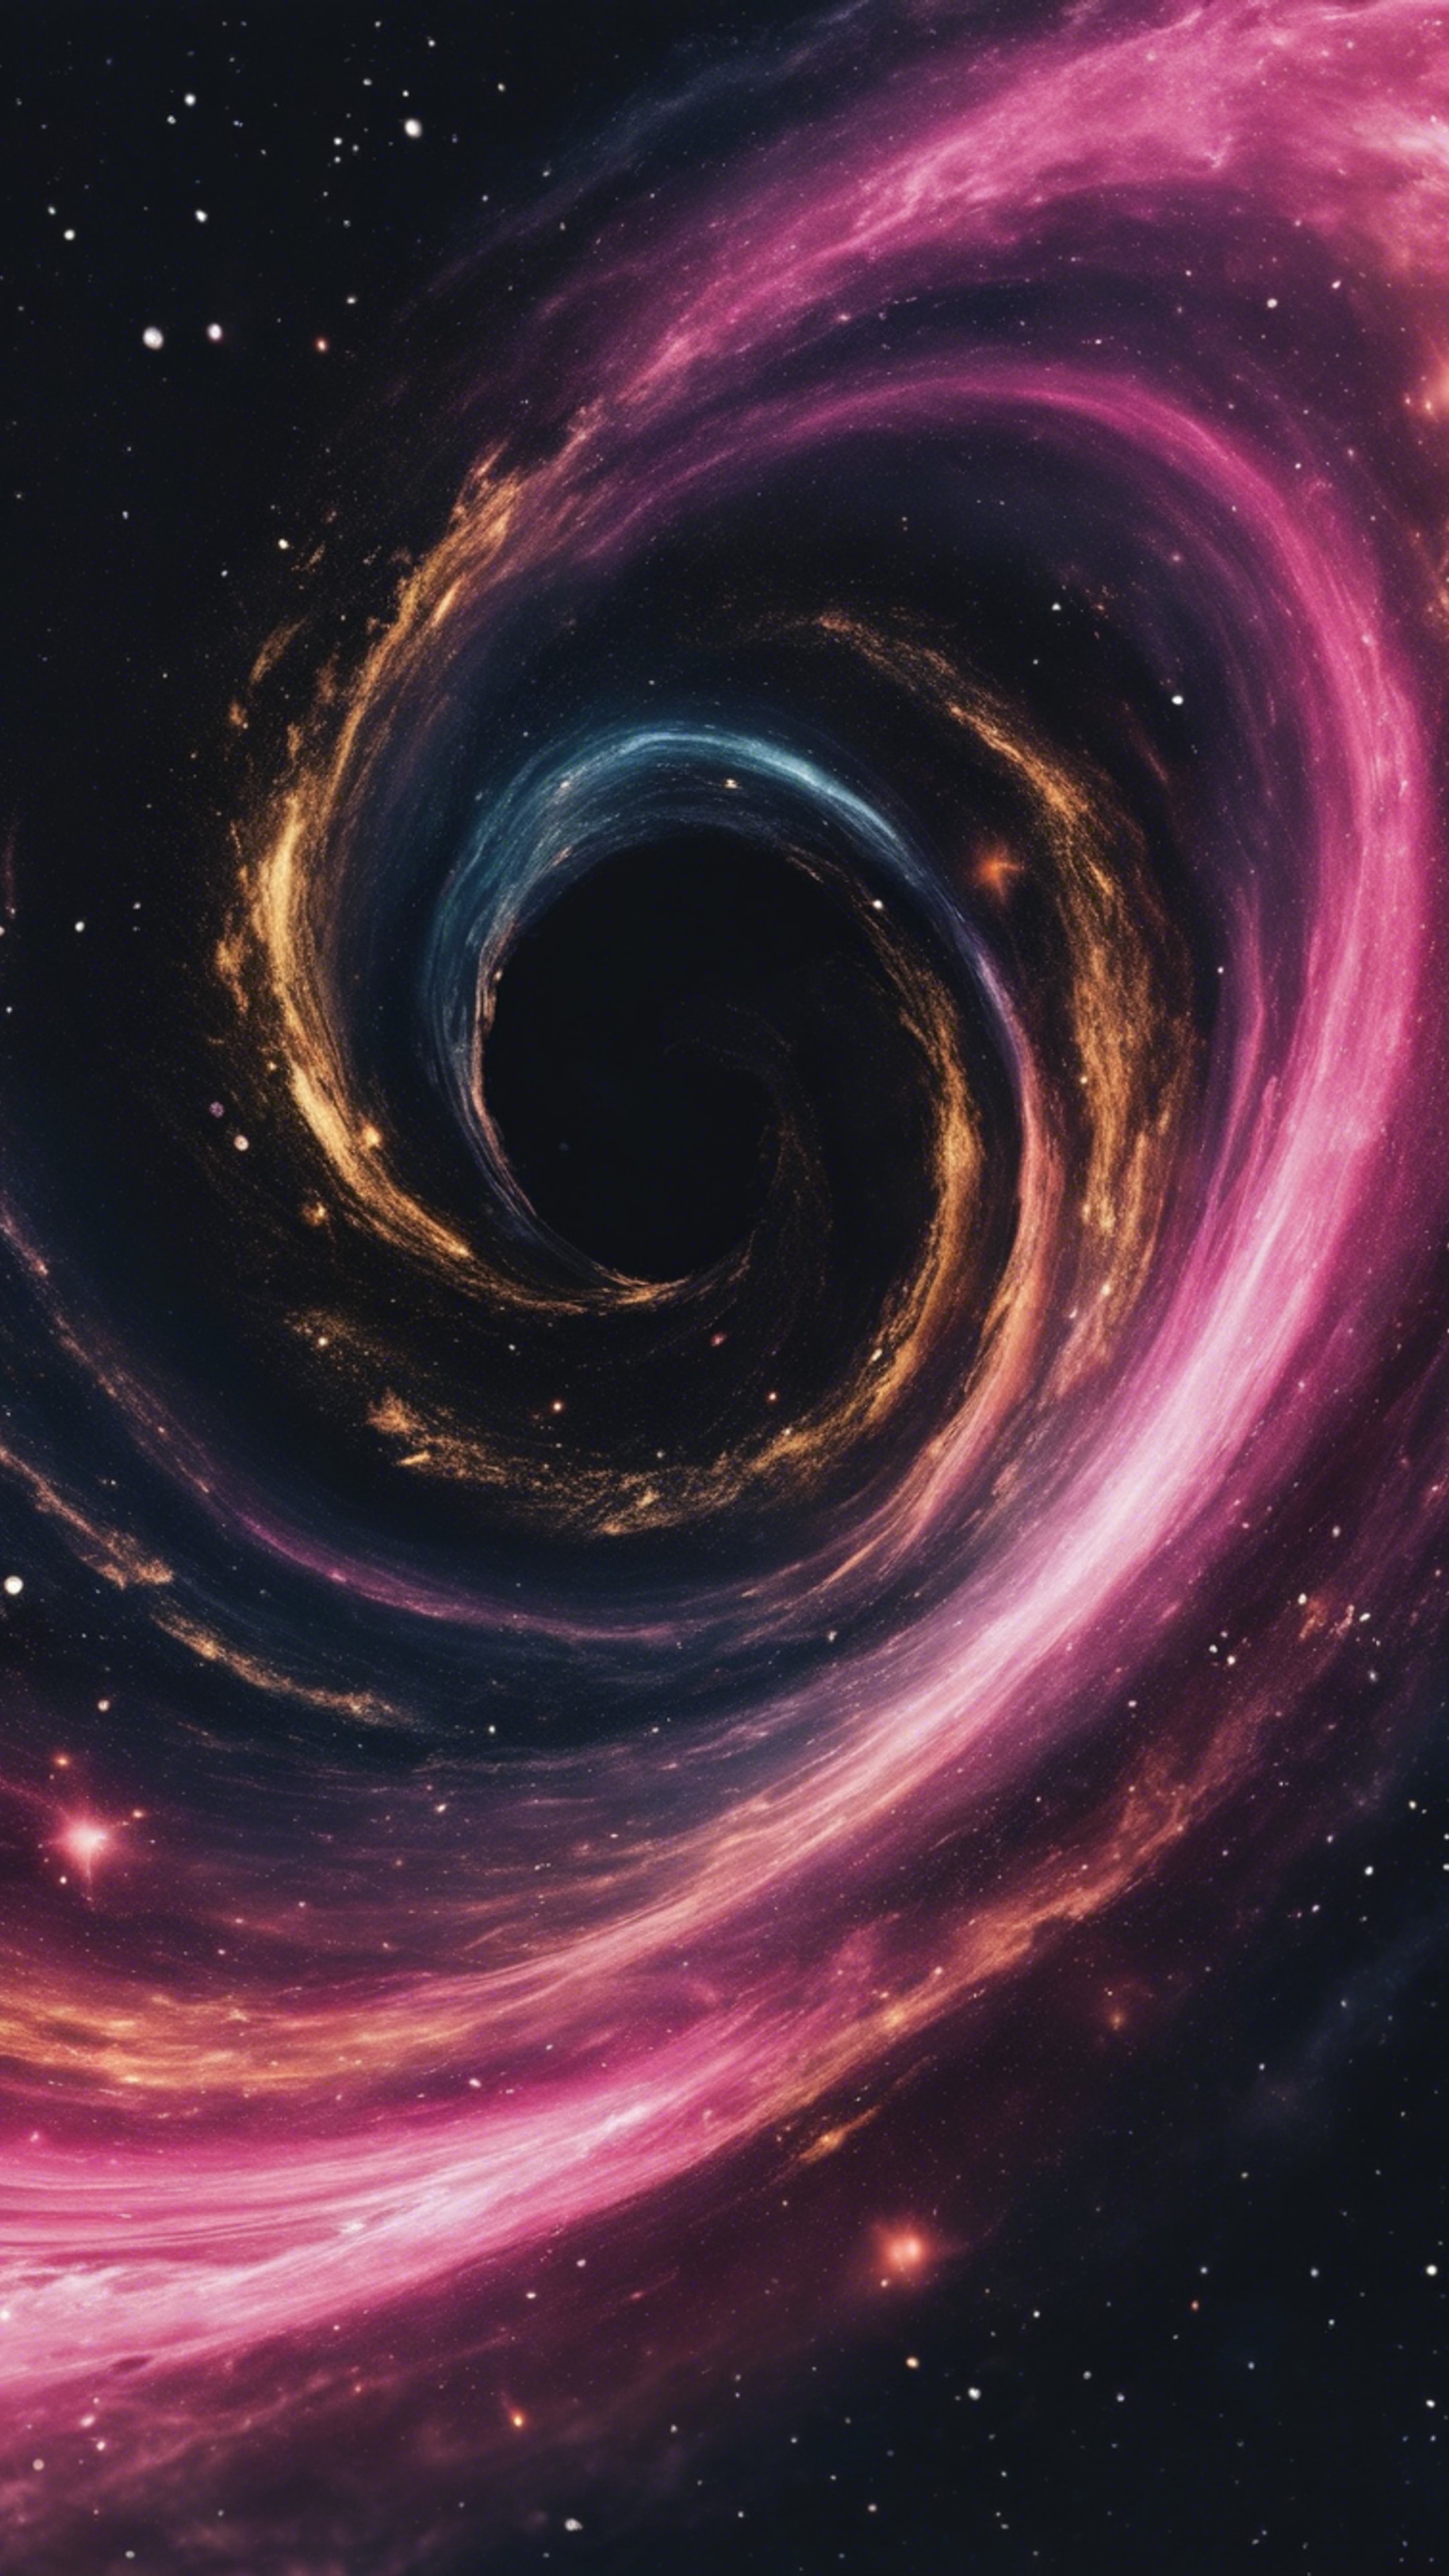 A swirling Galaxy with hues of pink and gold amongst the dark void of space. טפט[38386911806f452c9333]